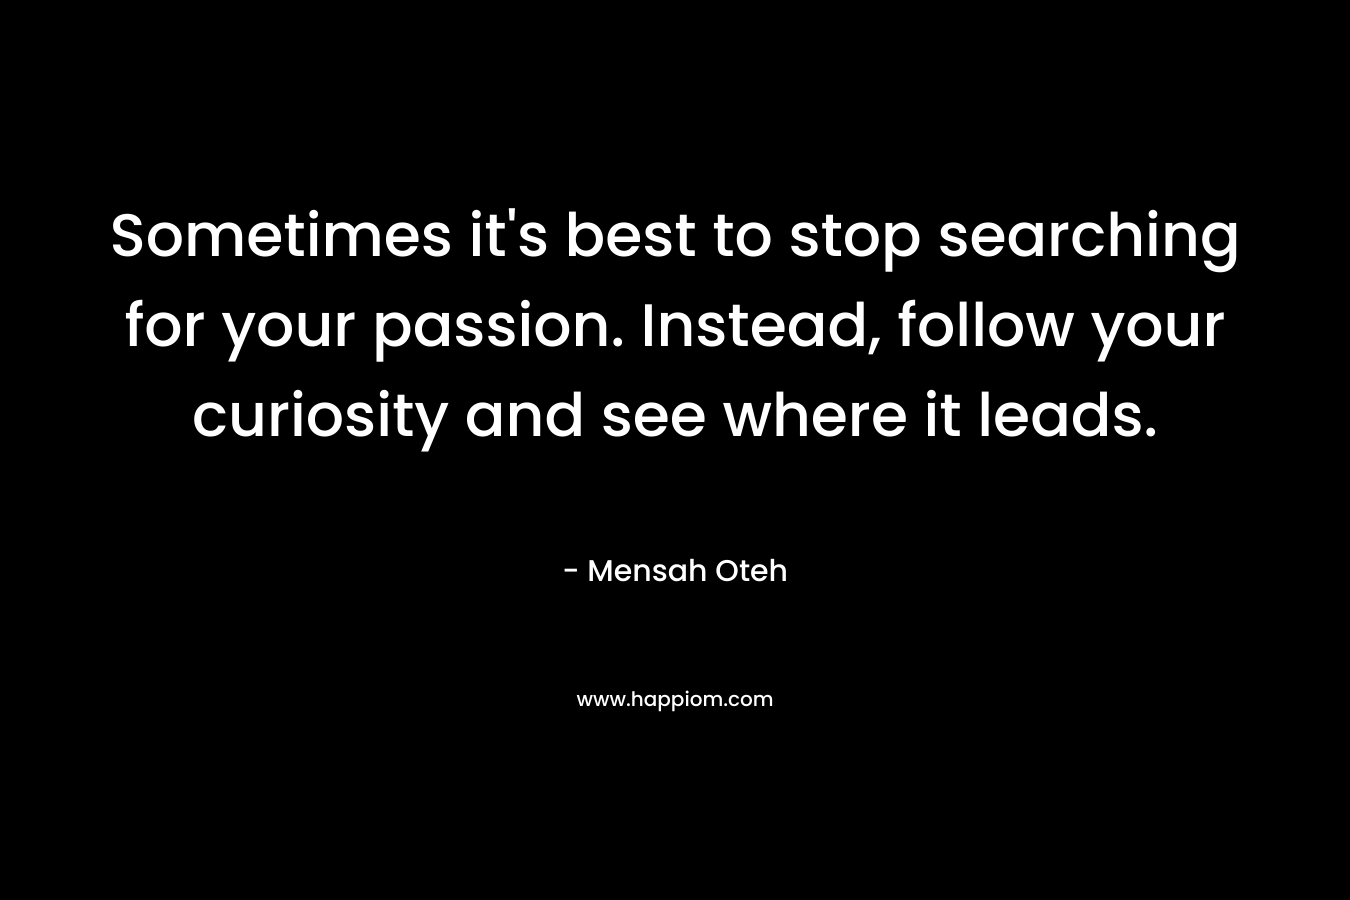 Sometimes it's best to stop searching for your passion. Instead, follow your curiosity and see where it leads.